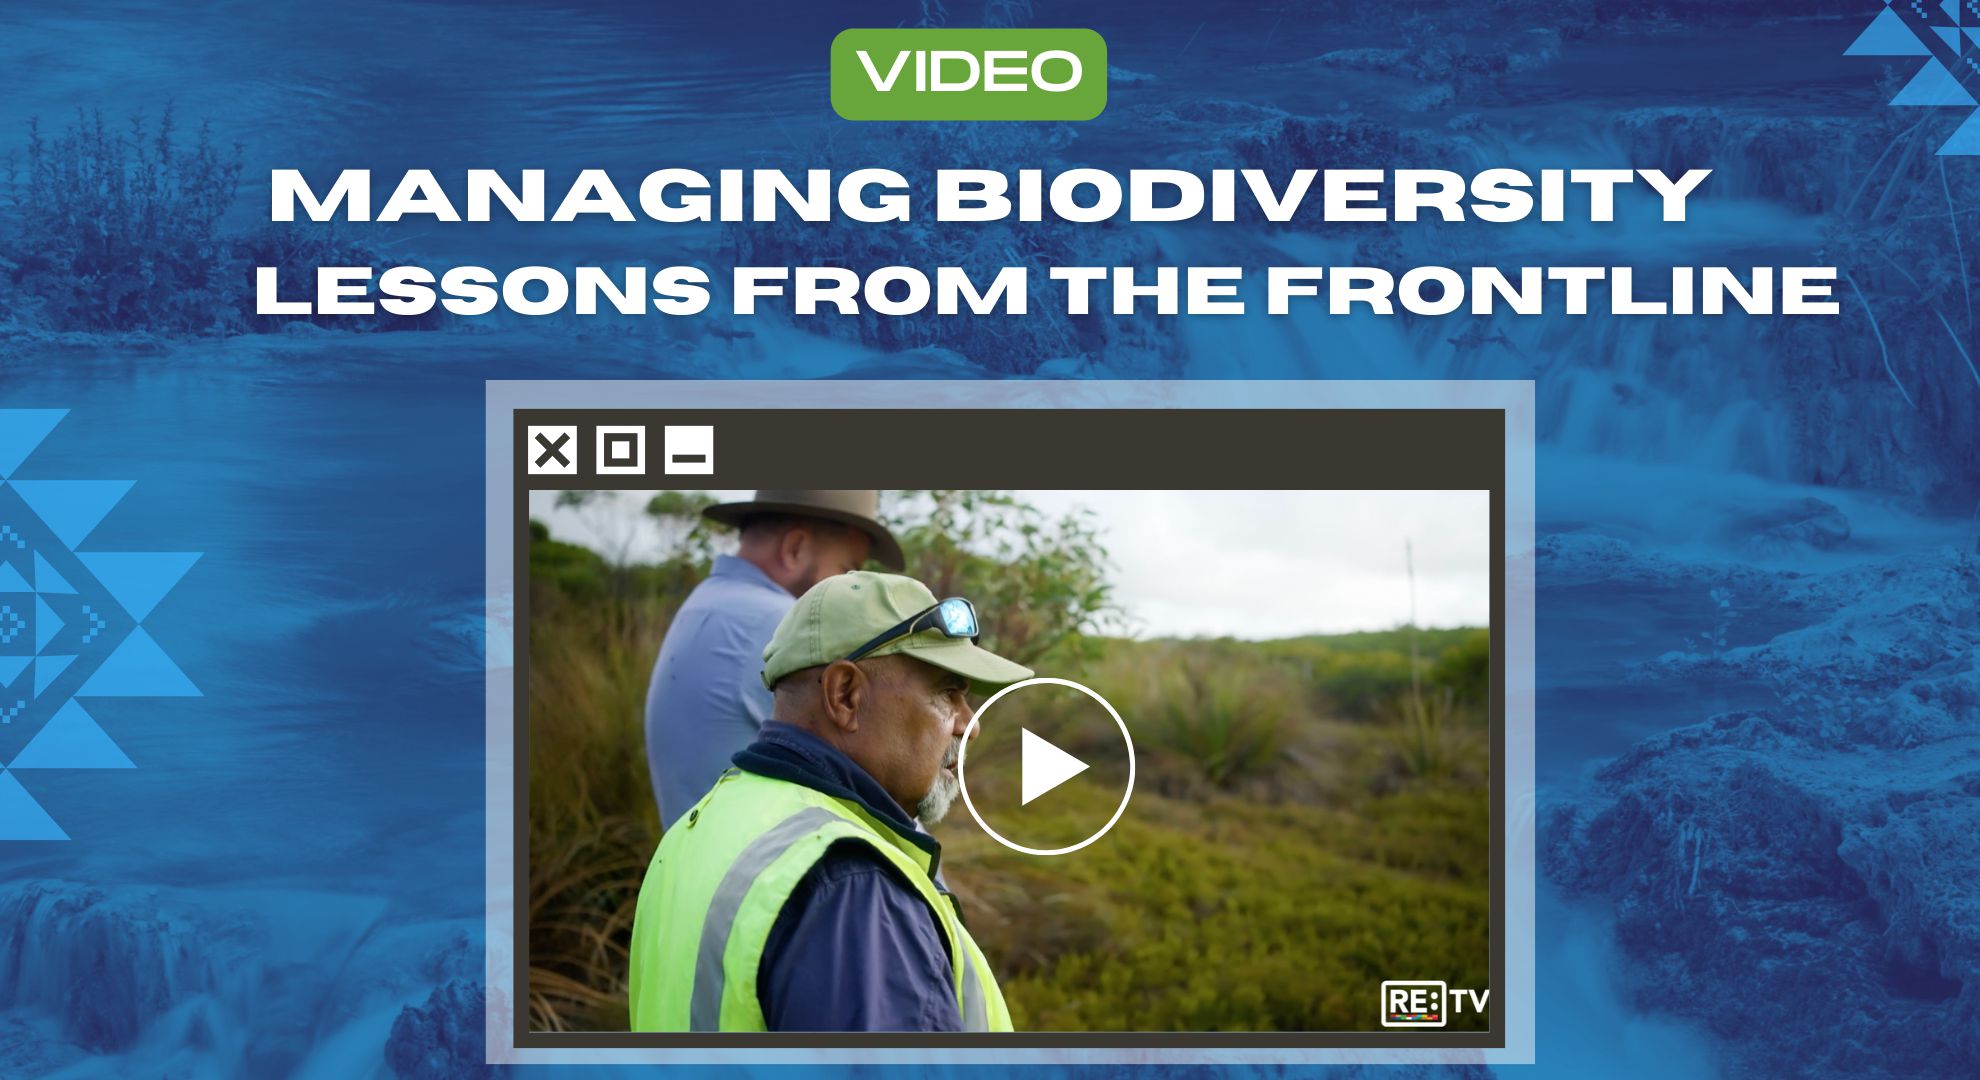 Managing Biodiversity Lessons from the Frontlines